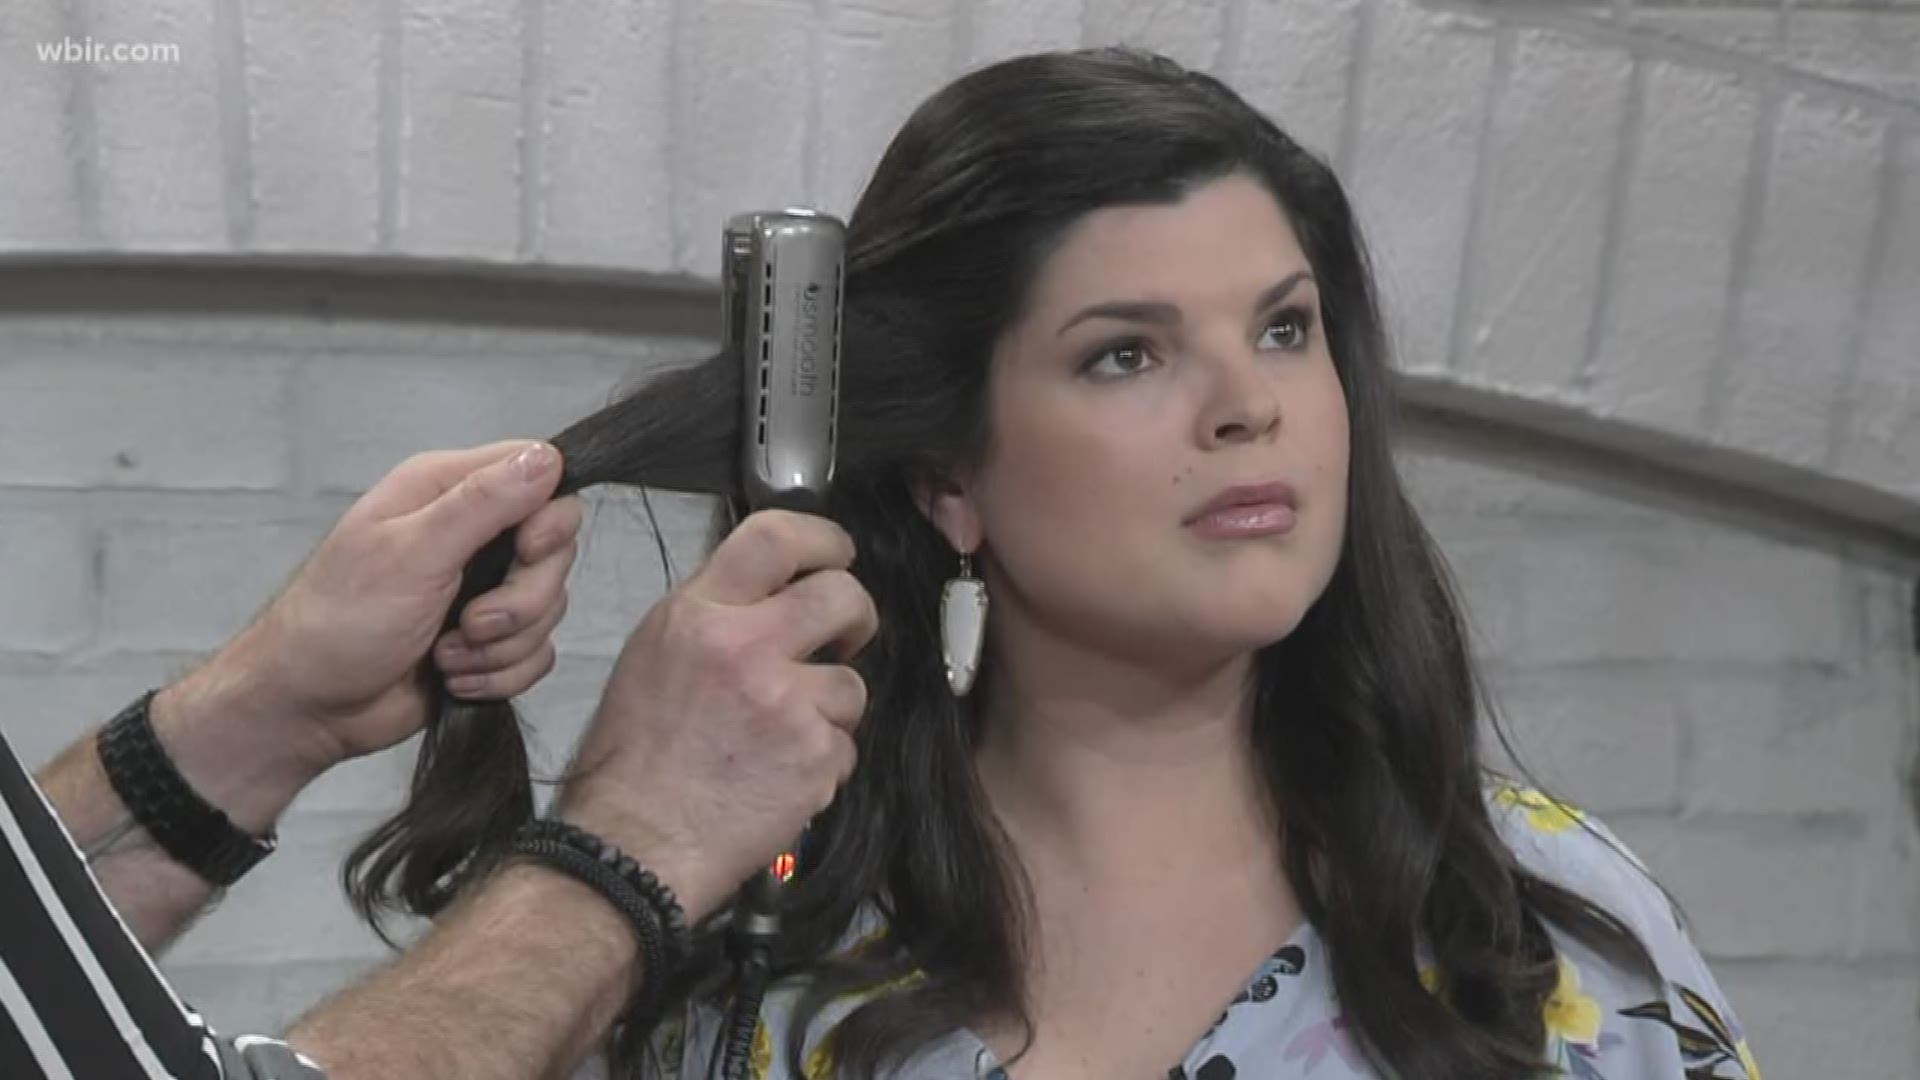 Shane Archer from Grow Knoxville shares tips and tools to get wavy hair.